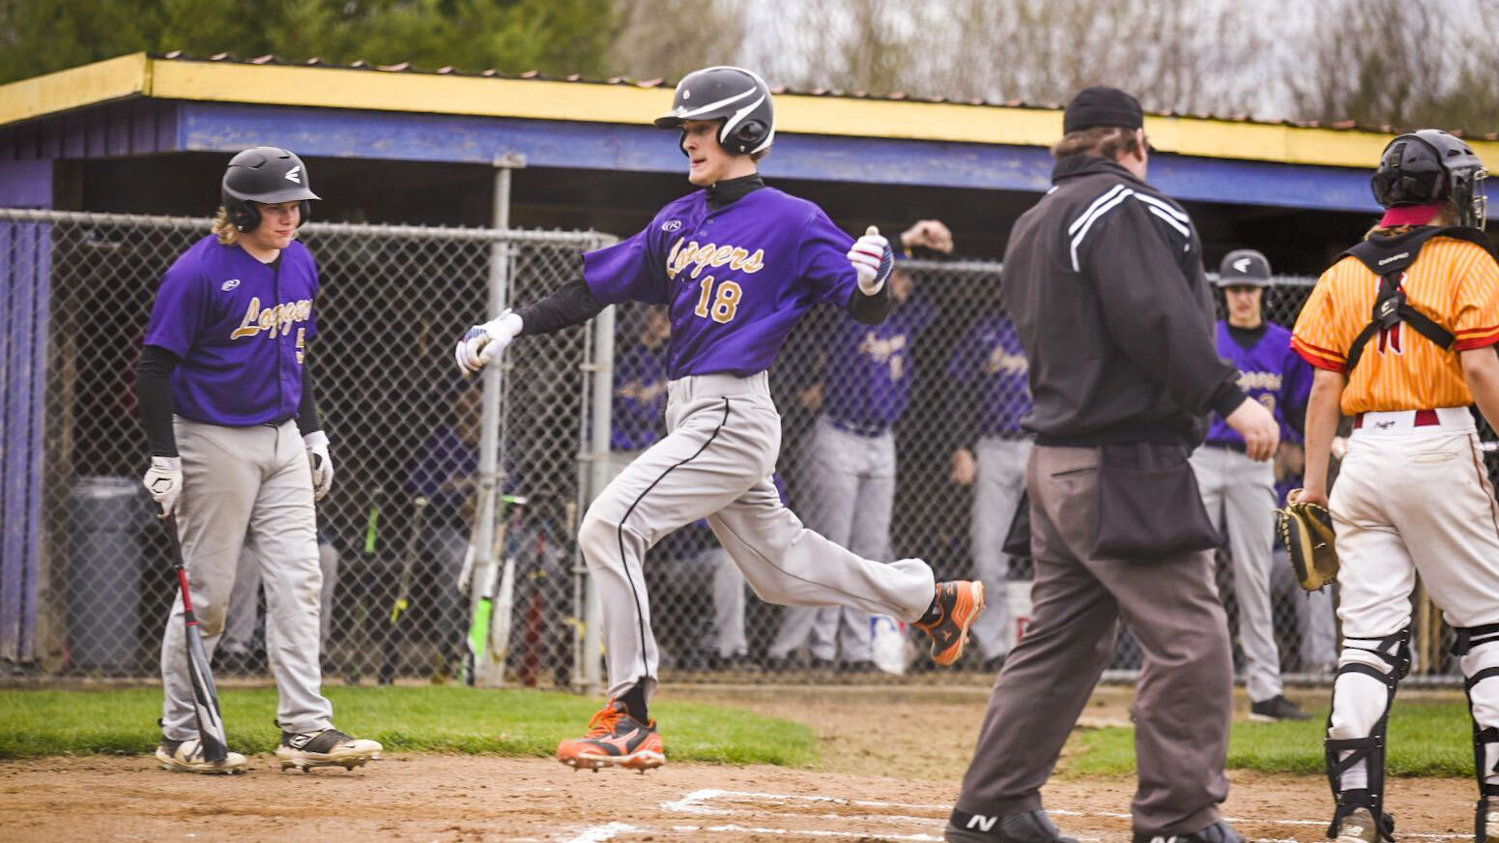 Onalaska's Lethon Fitch scores a run during a home game against Winlock on March 31.